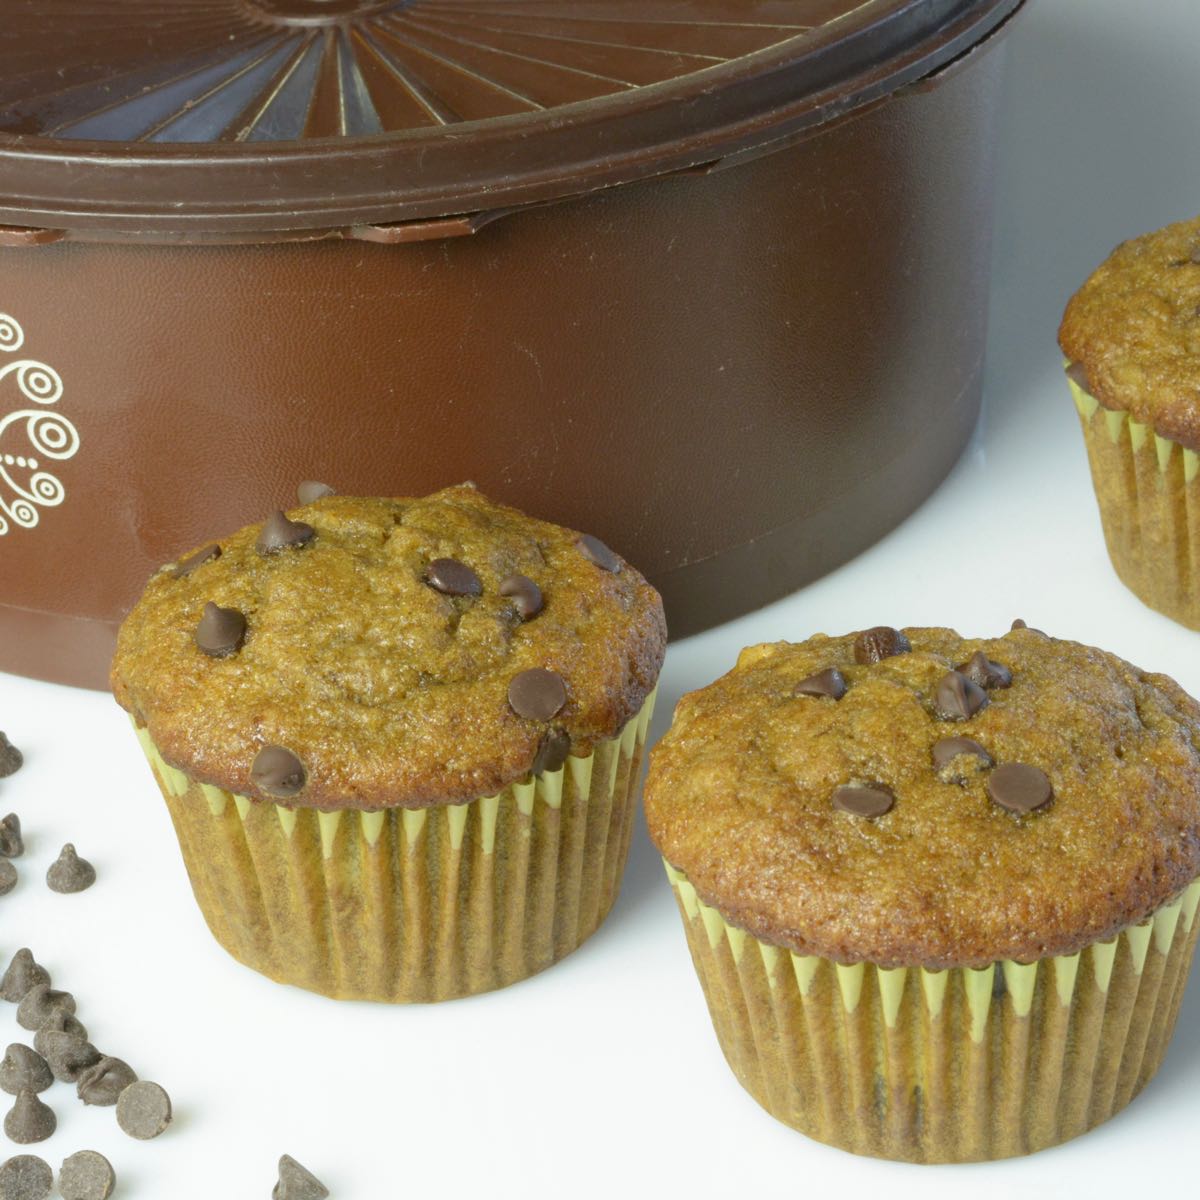 Chocolate Chip Banana Muffins with teff flour on the counter in front of a container.